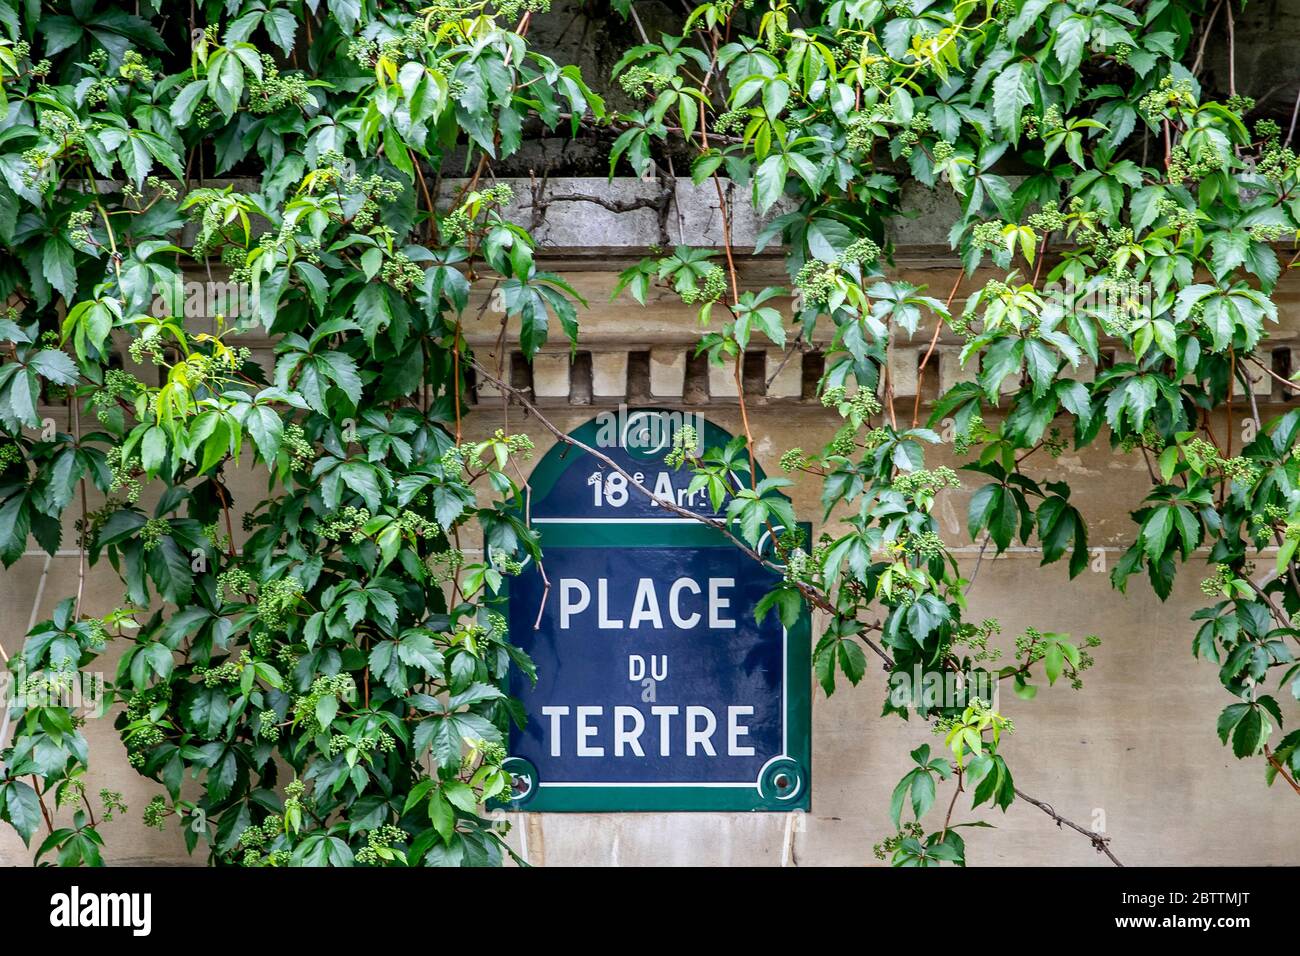 Paris, France - May 12, 2020: Place du Tertre street sign, a square famous for its painters and draftsmen in Montmartre in Paris Stock Photo